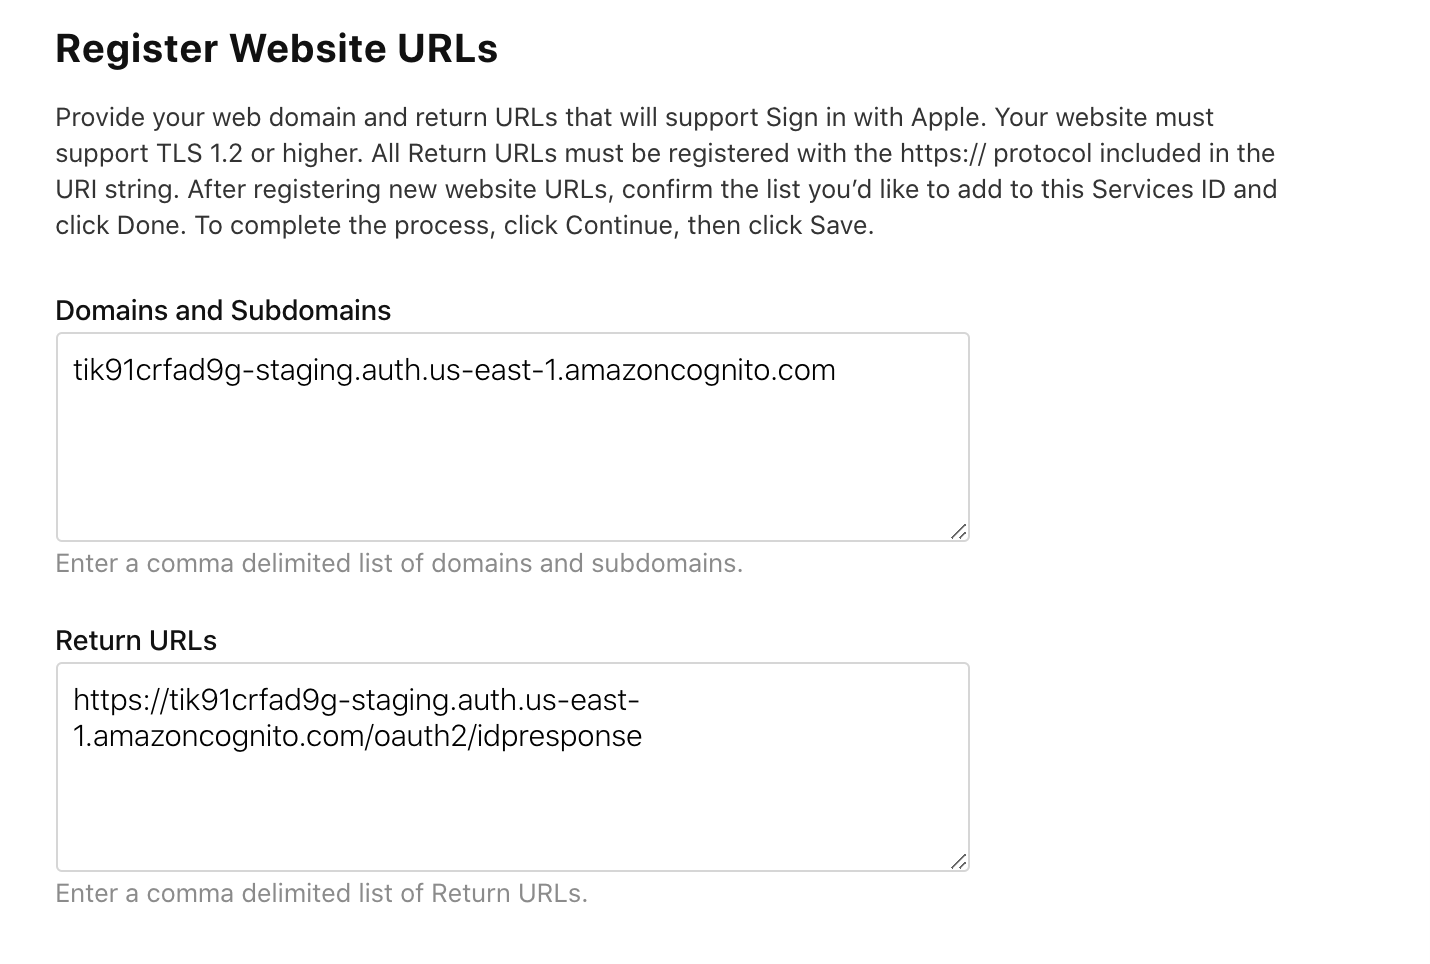 The sign in with Apple interface with correct urls